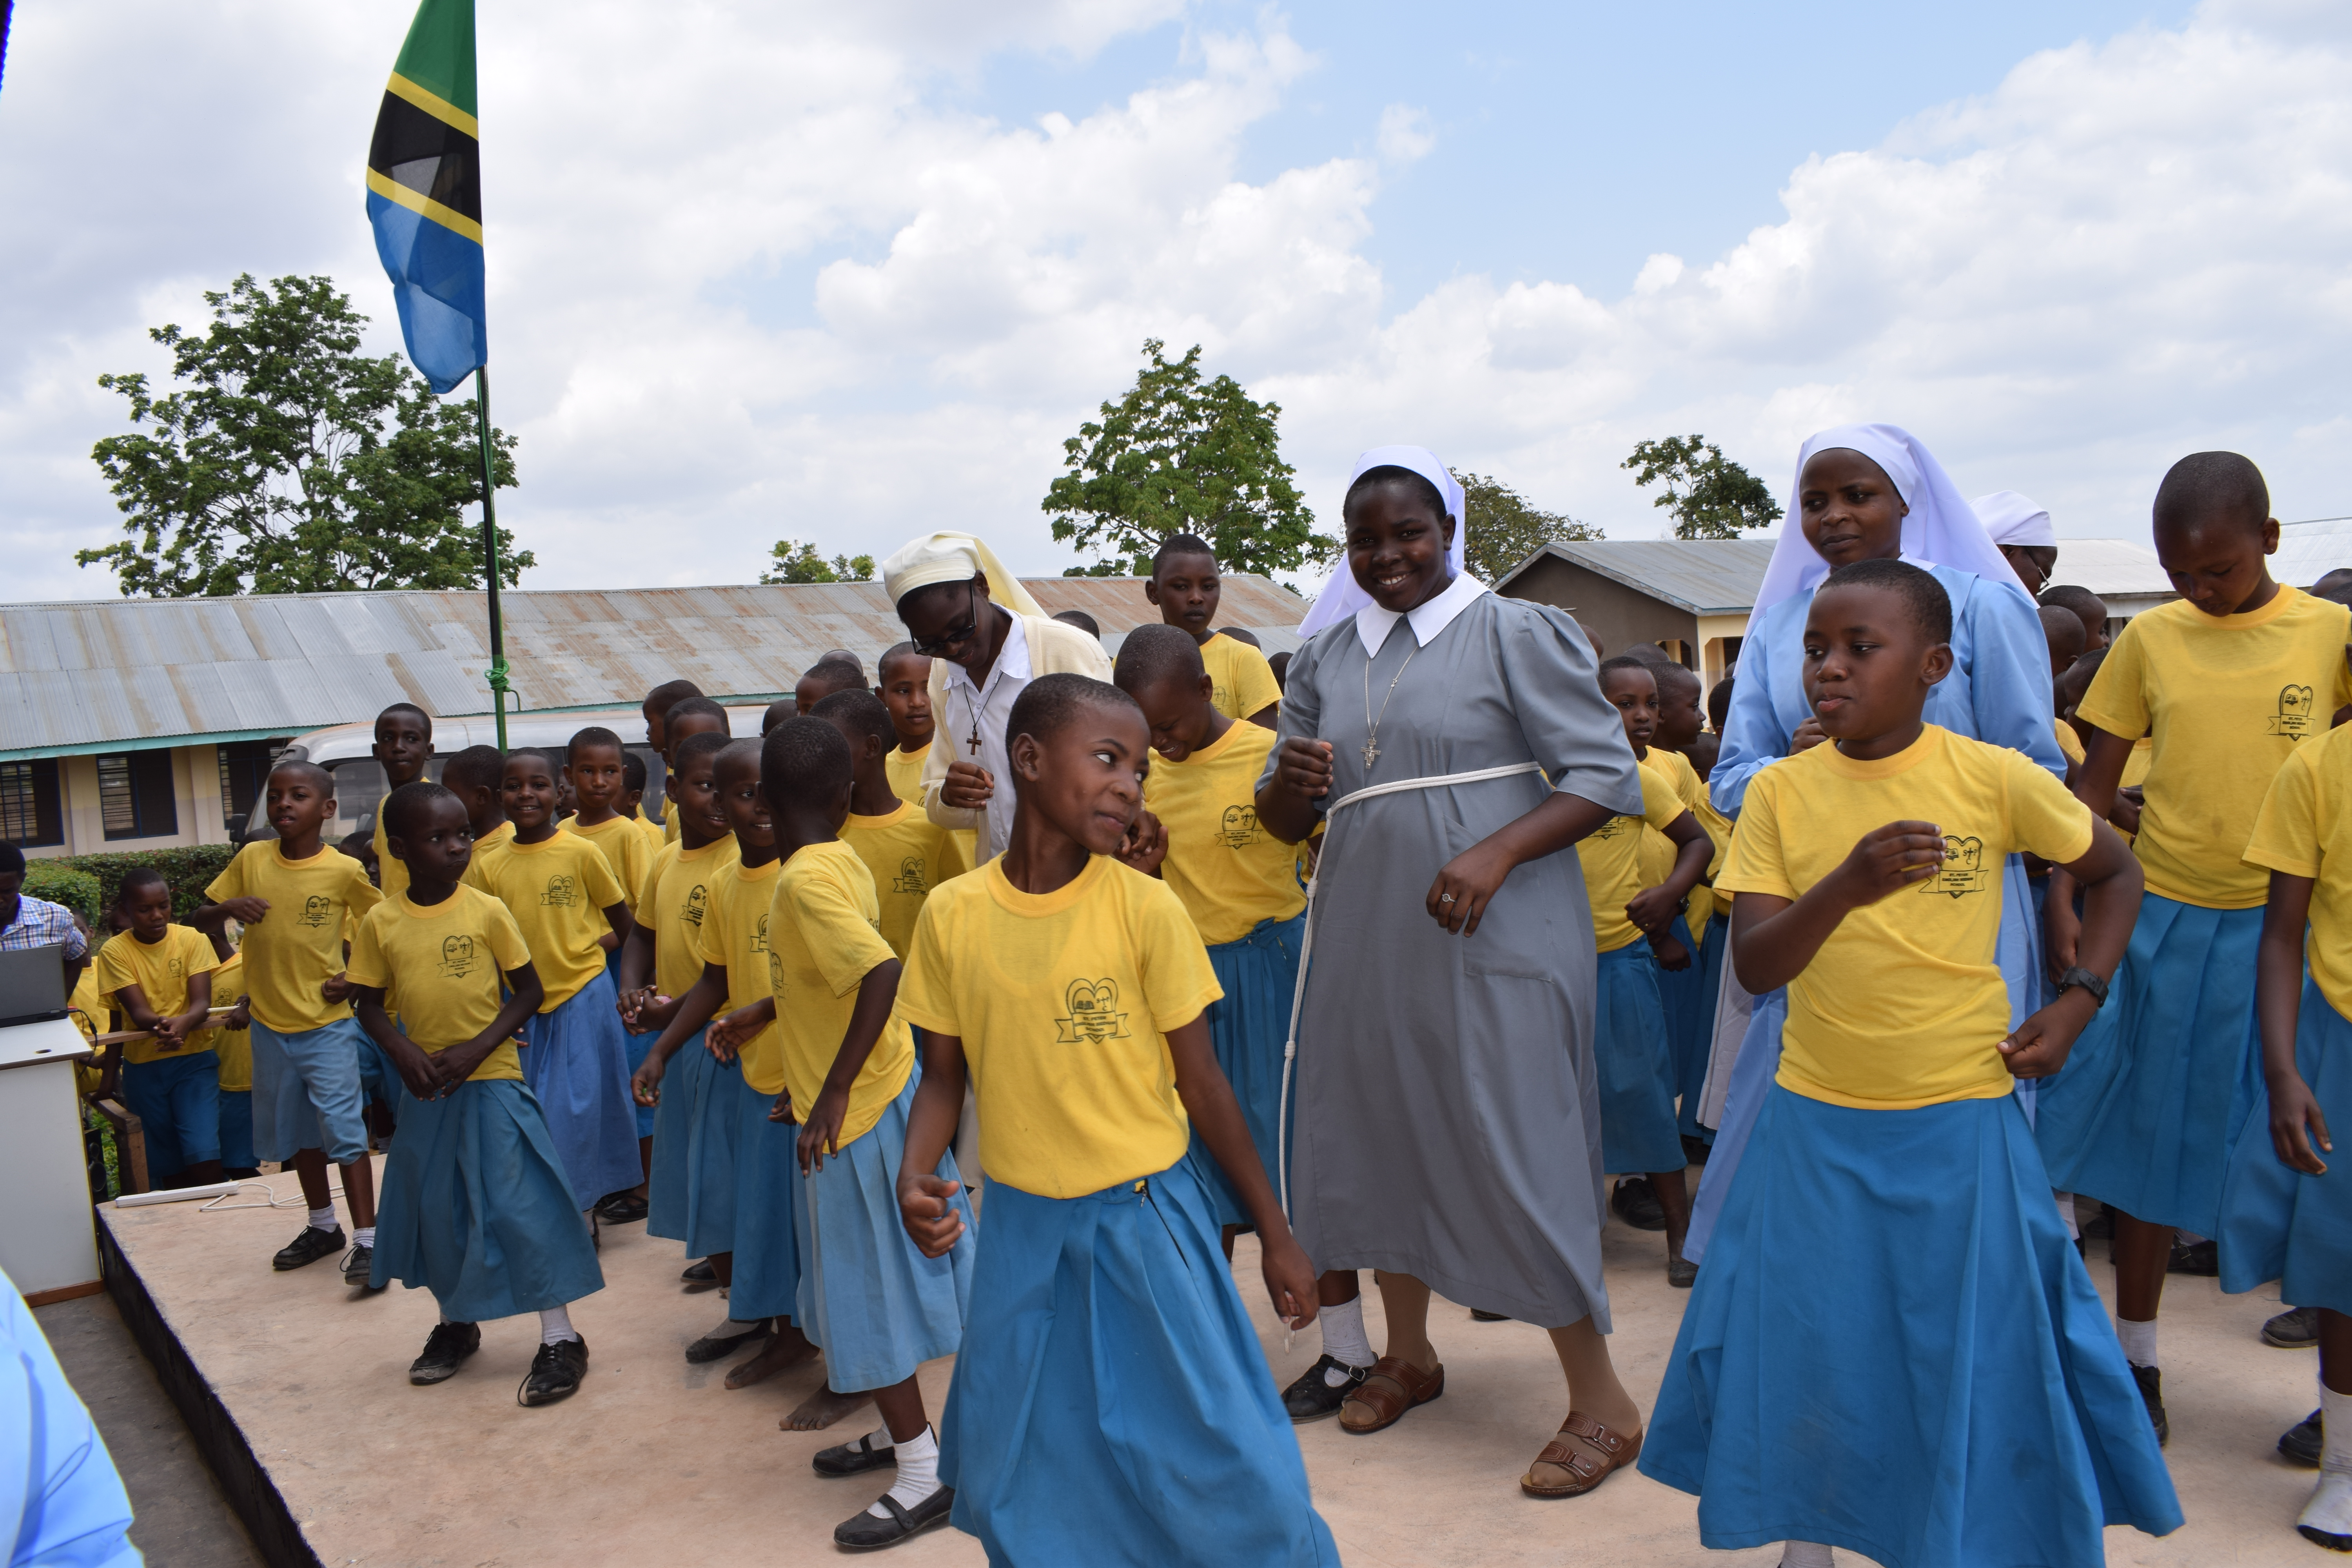 ASEC Sisters teach children how to dance at St. Peter Clavery School in Mikumi, Tanzania